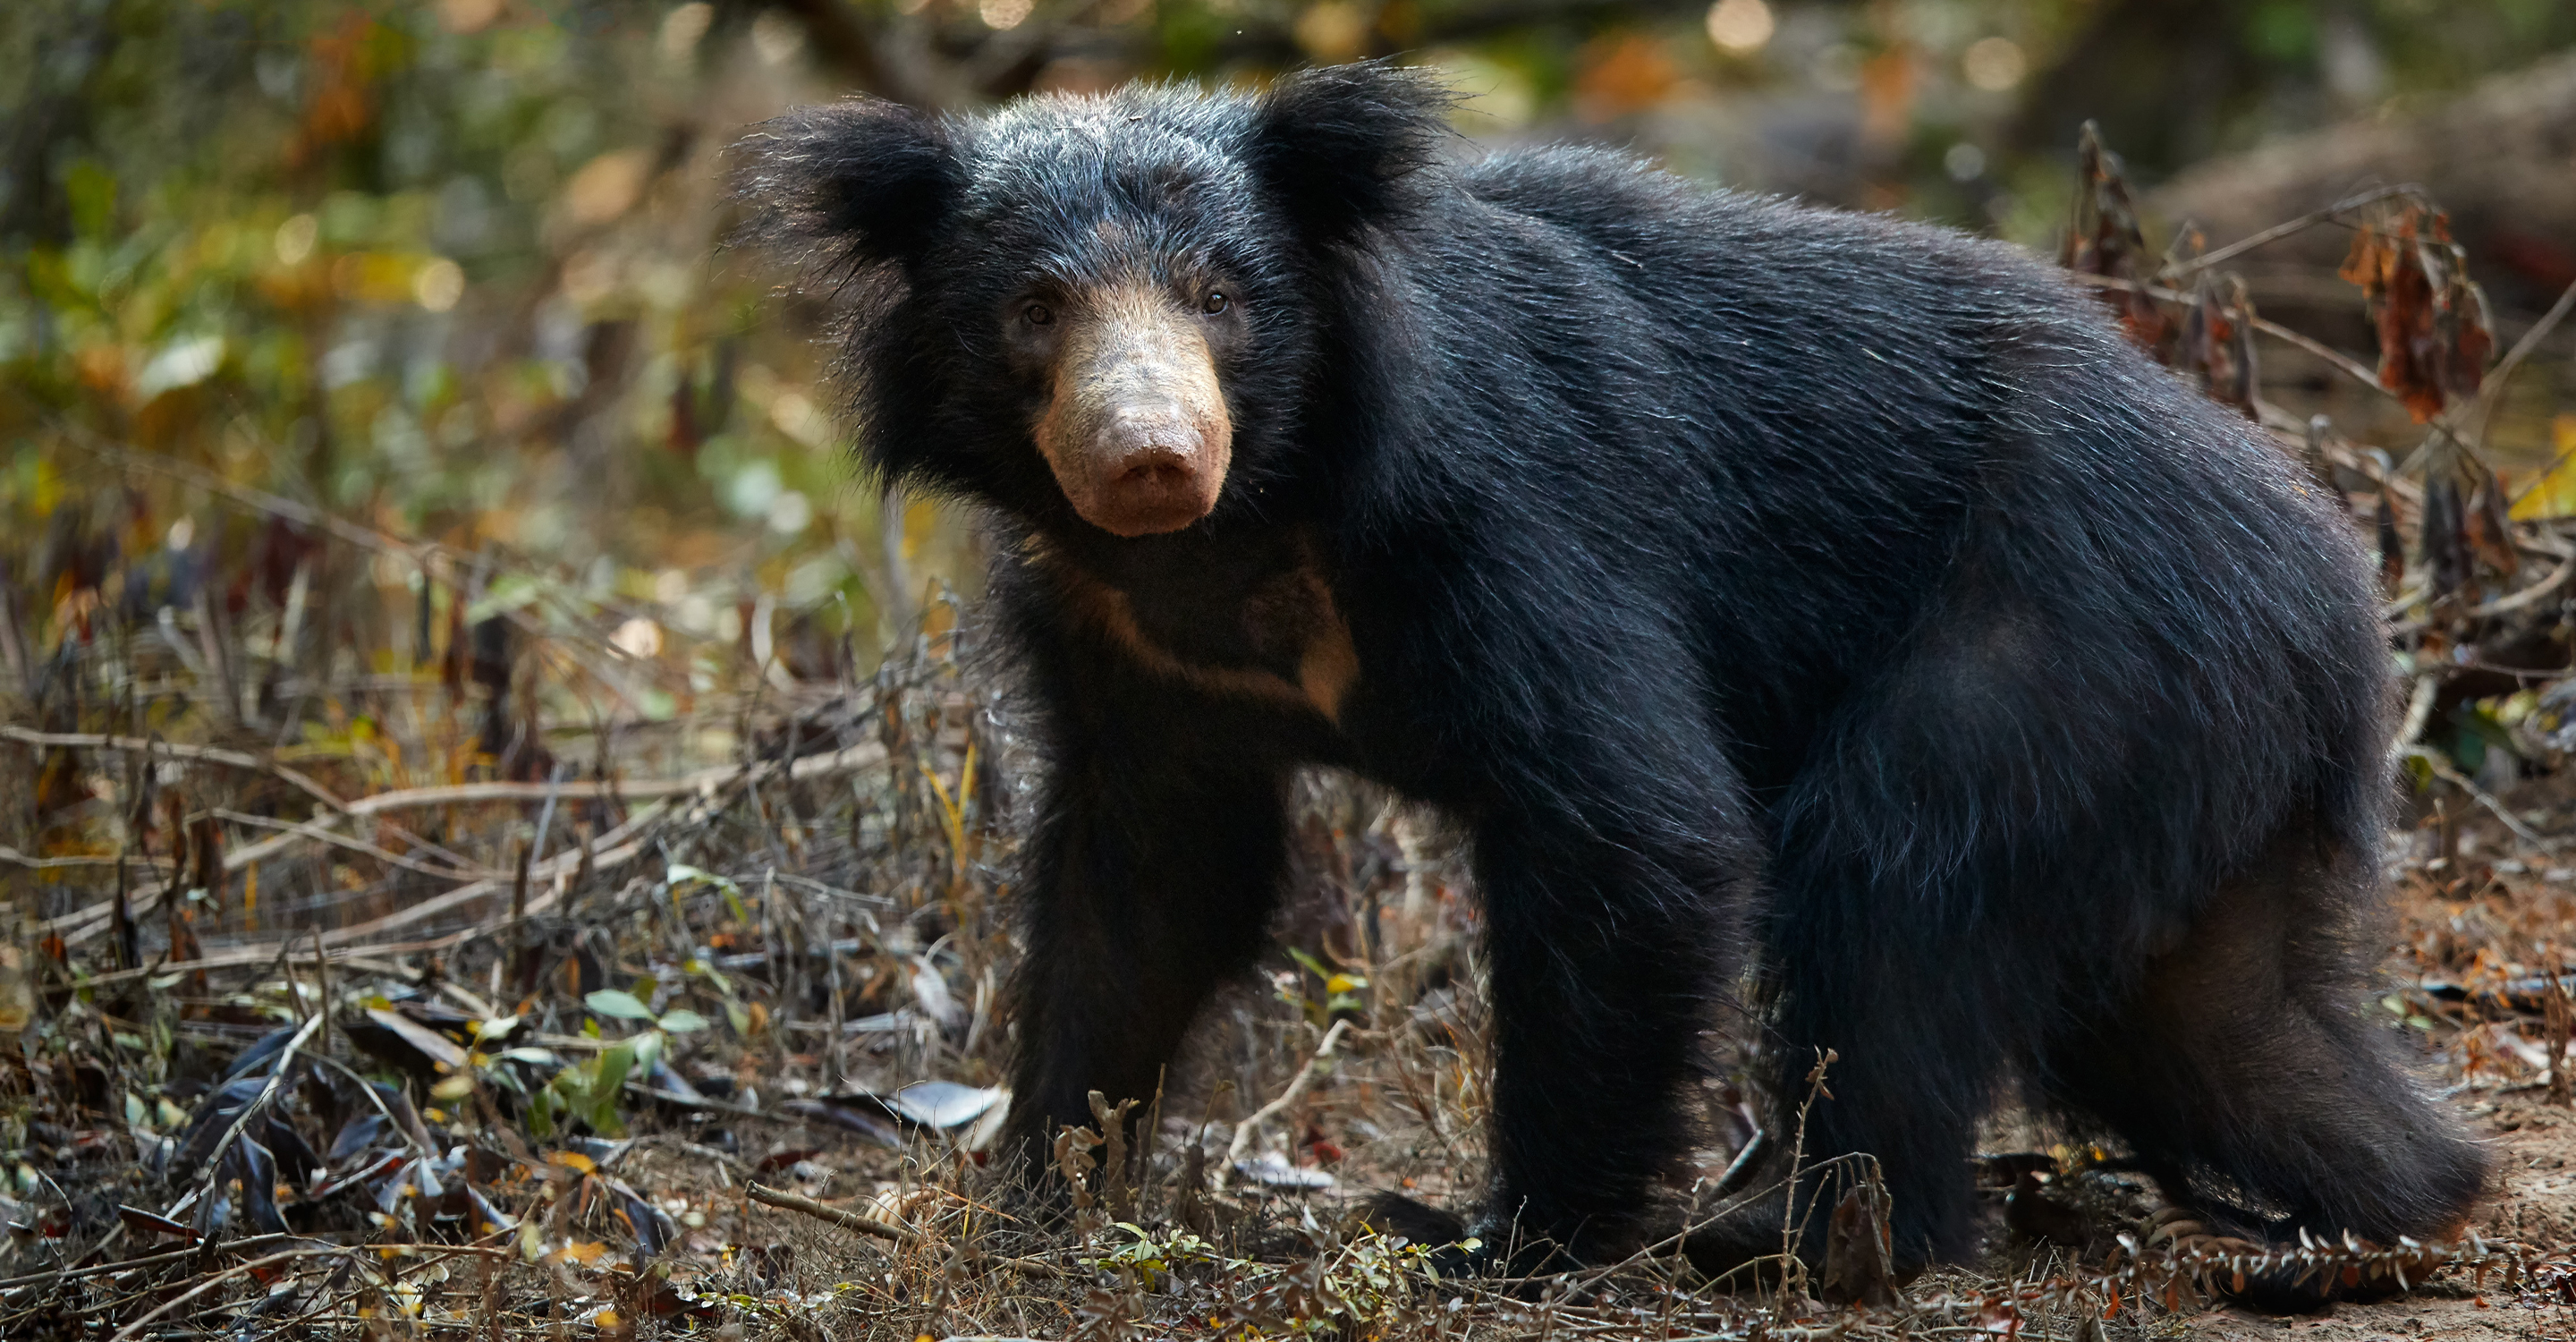 A close-up of a sloth bear in Ranthambore National Park, India